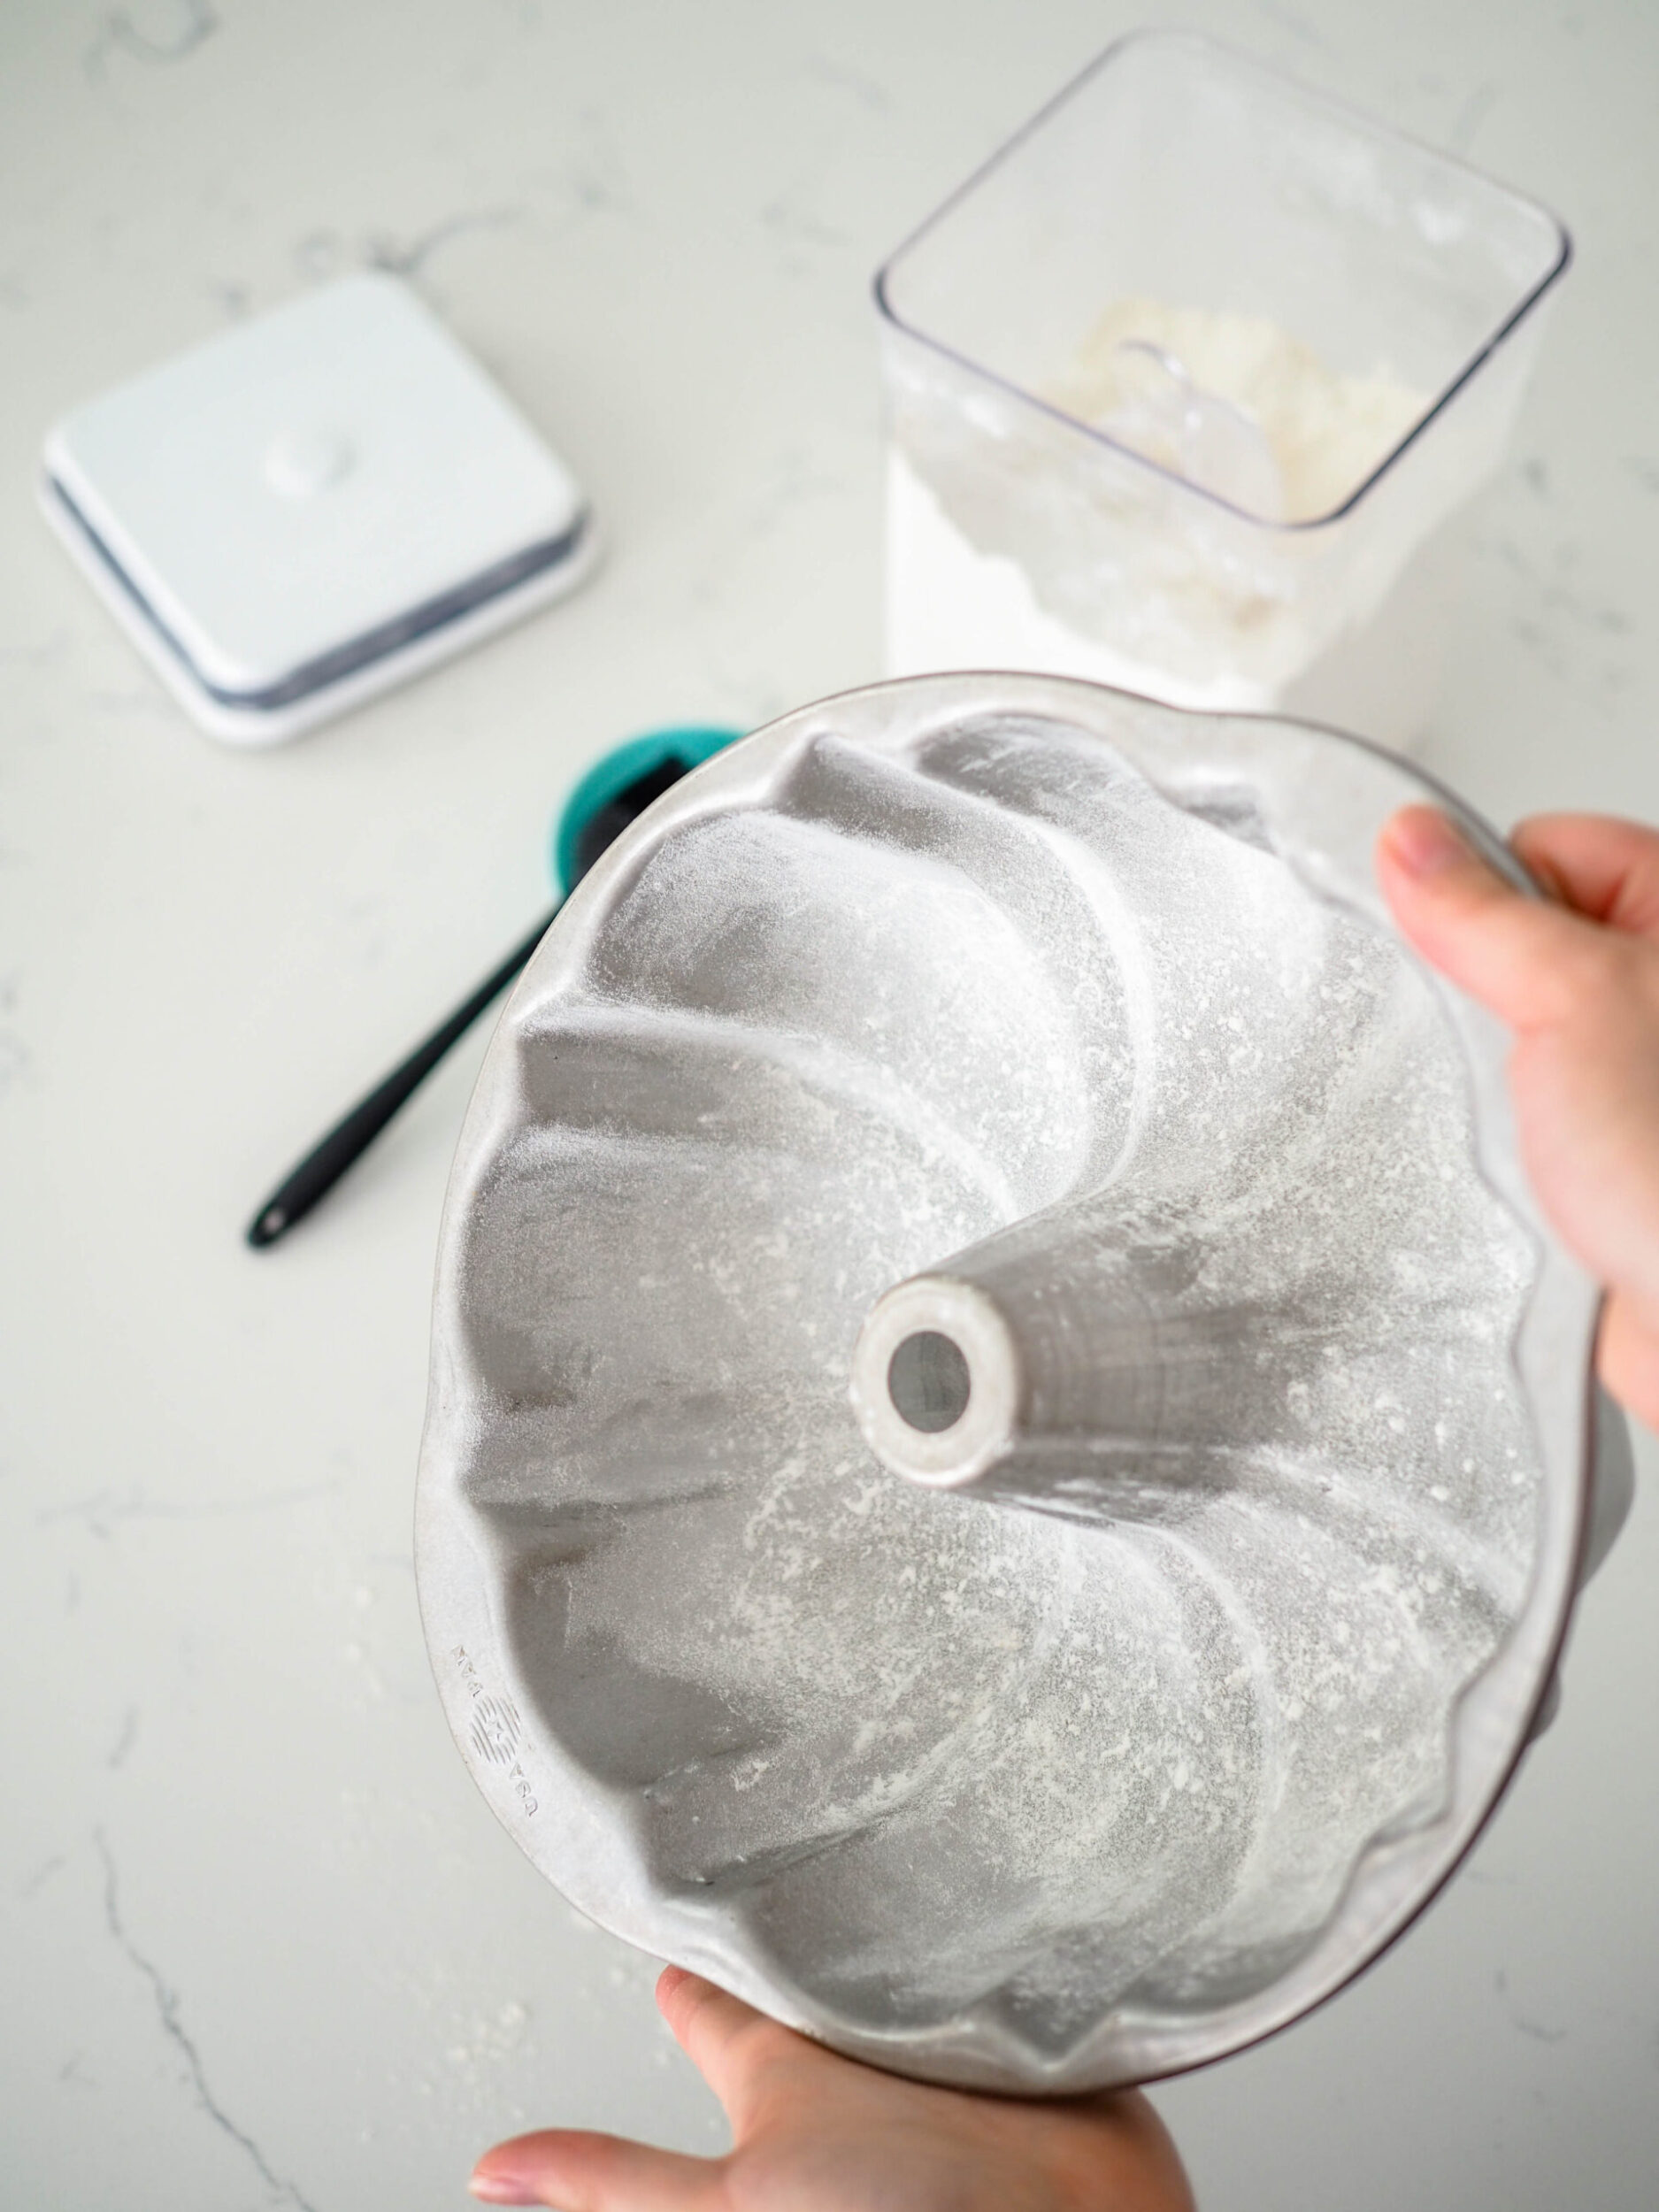 Two hands hold a Bundt pan at an angle, patting flour around inside of it.